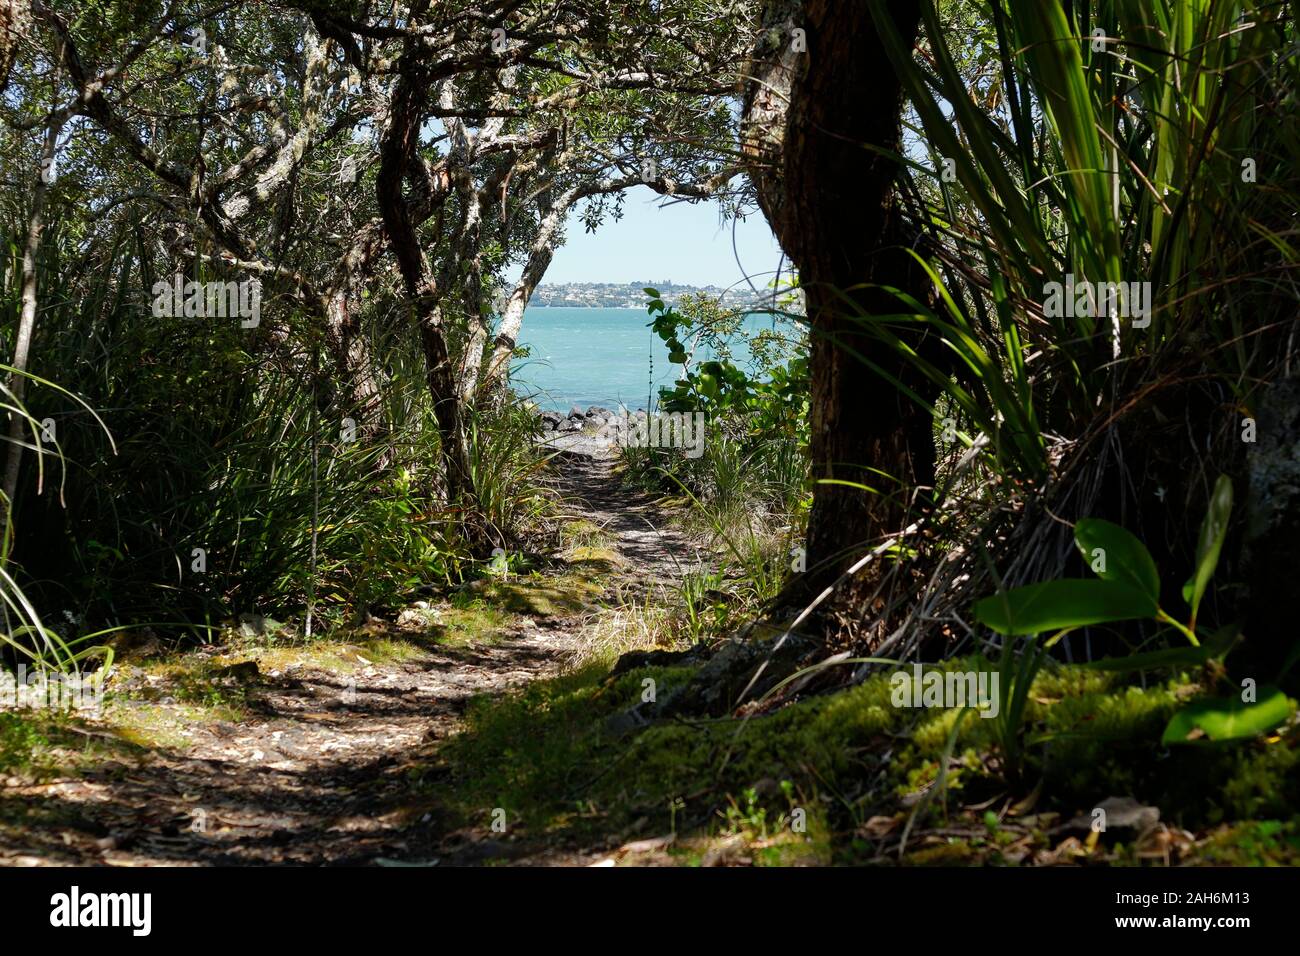 Day trip, hiking and trail paths lead through the scenic Rangitoto Island Wildlife Sanctuary near Auckland, New Zealand Stock Photo